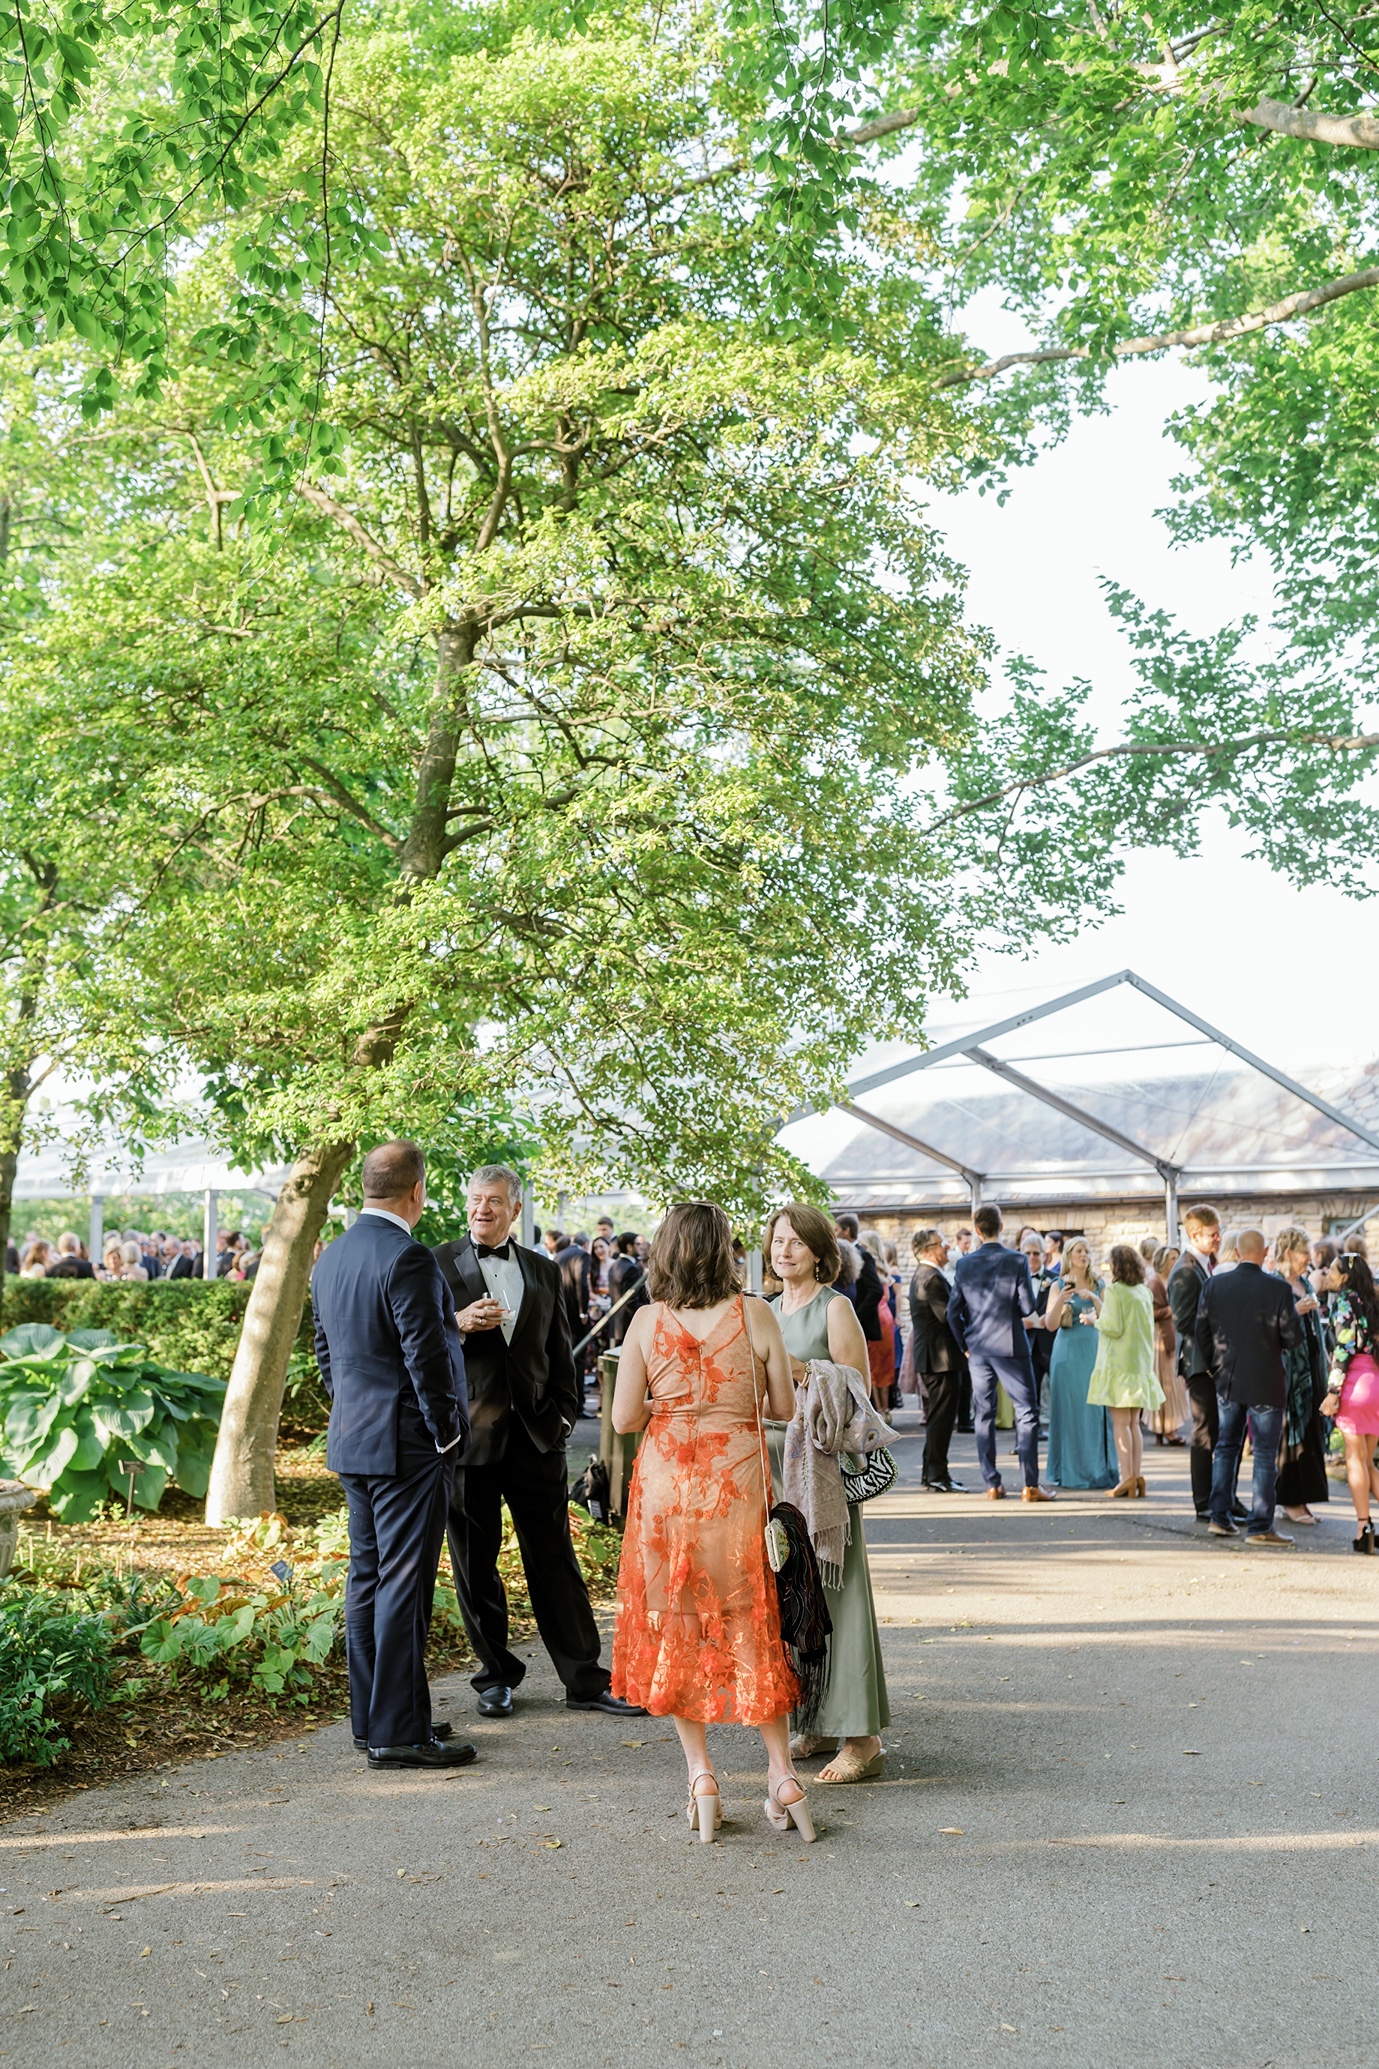 Guests enjoy the Yellow Dell Gardens cocktail hour